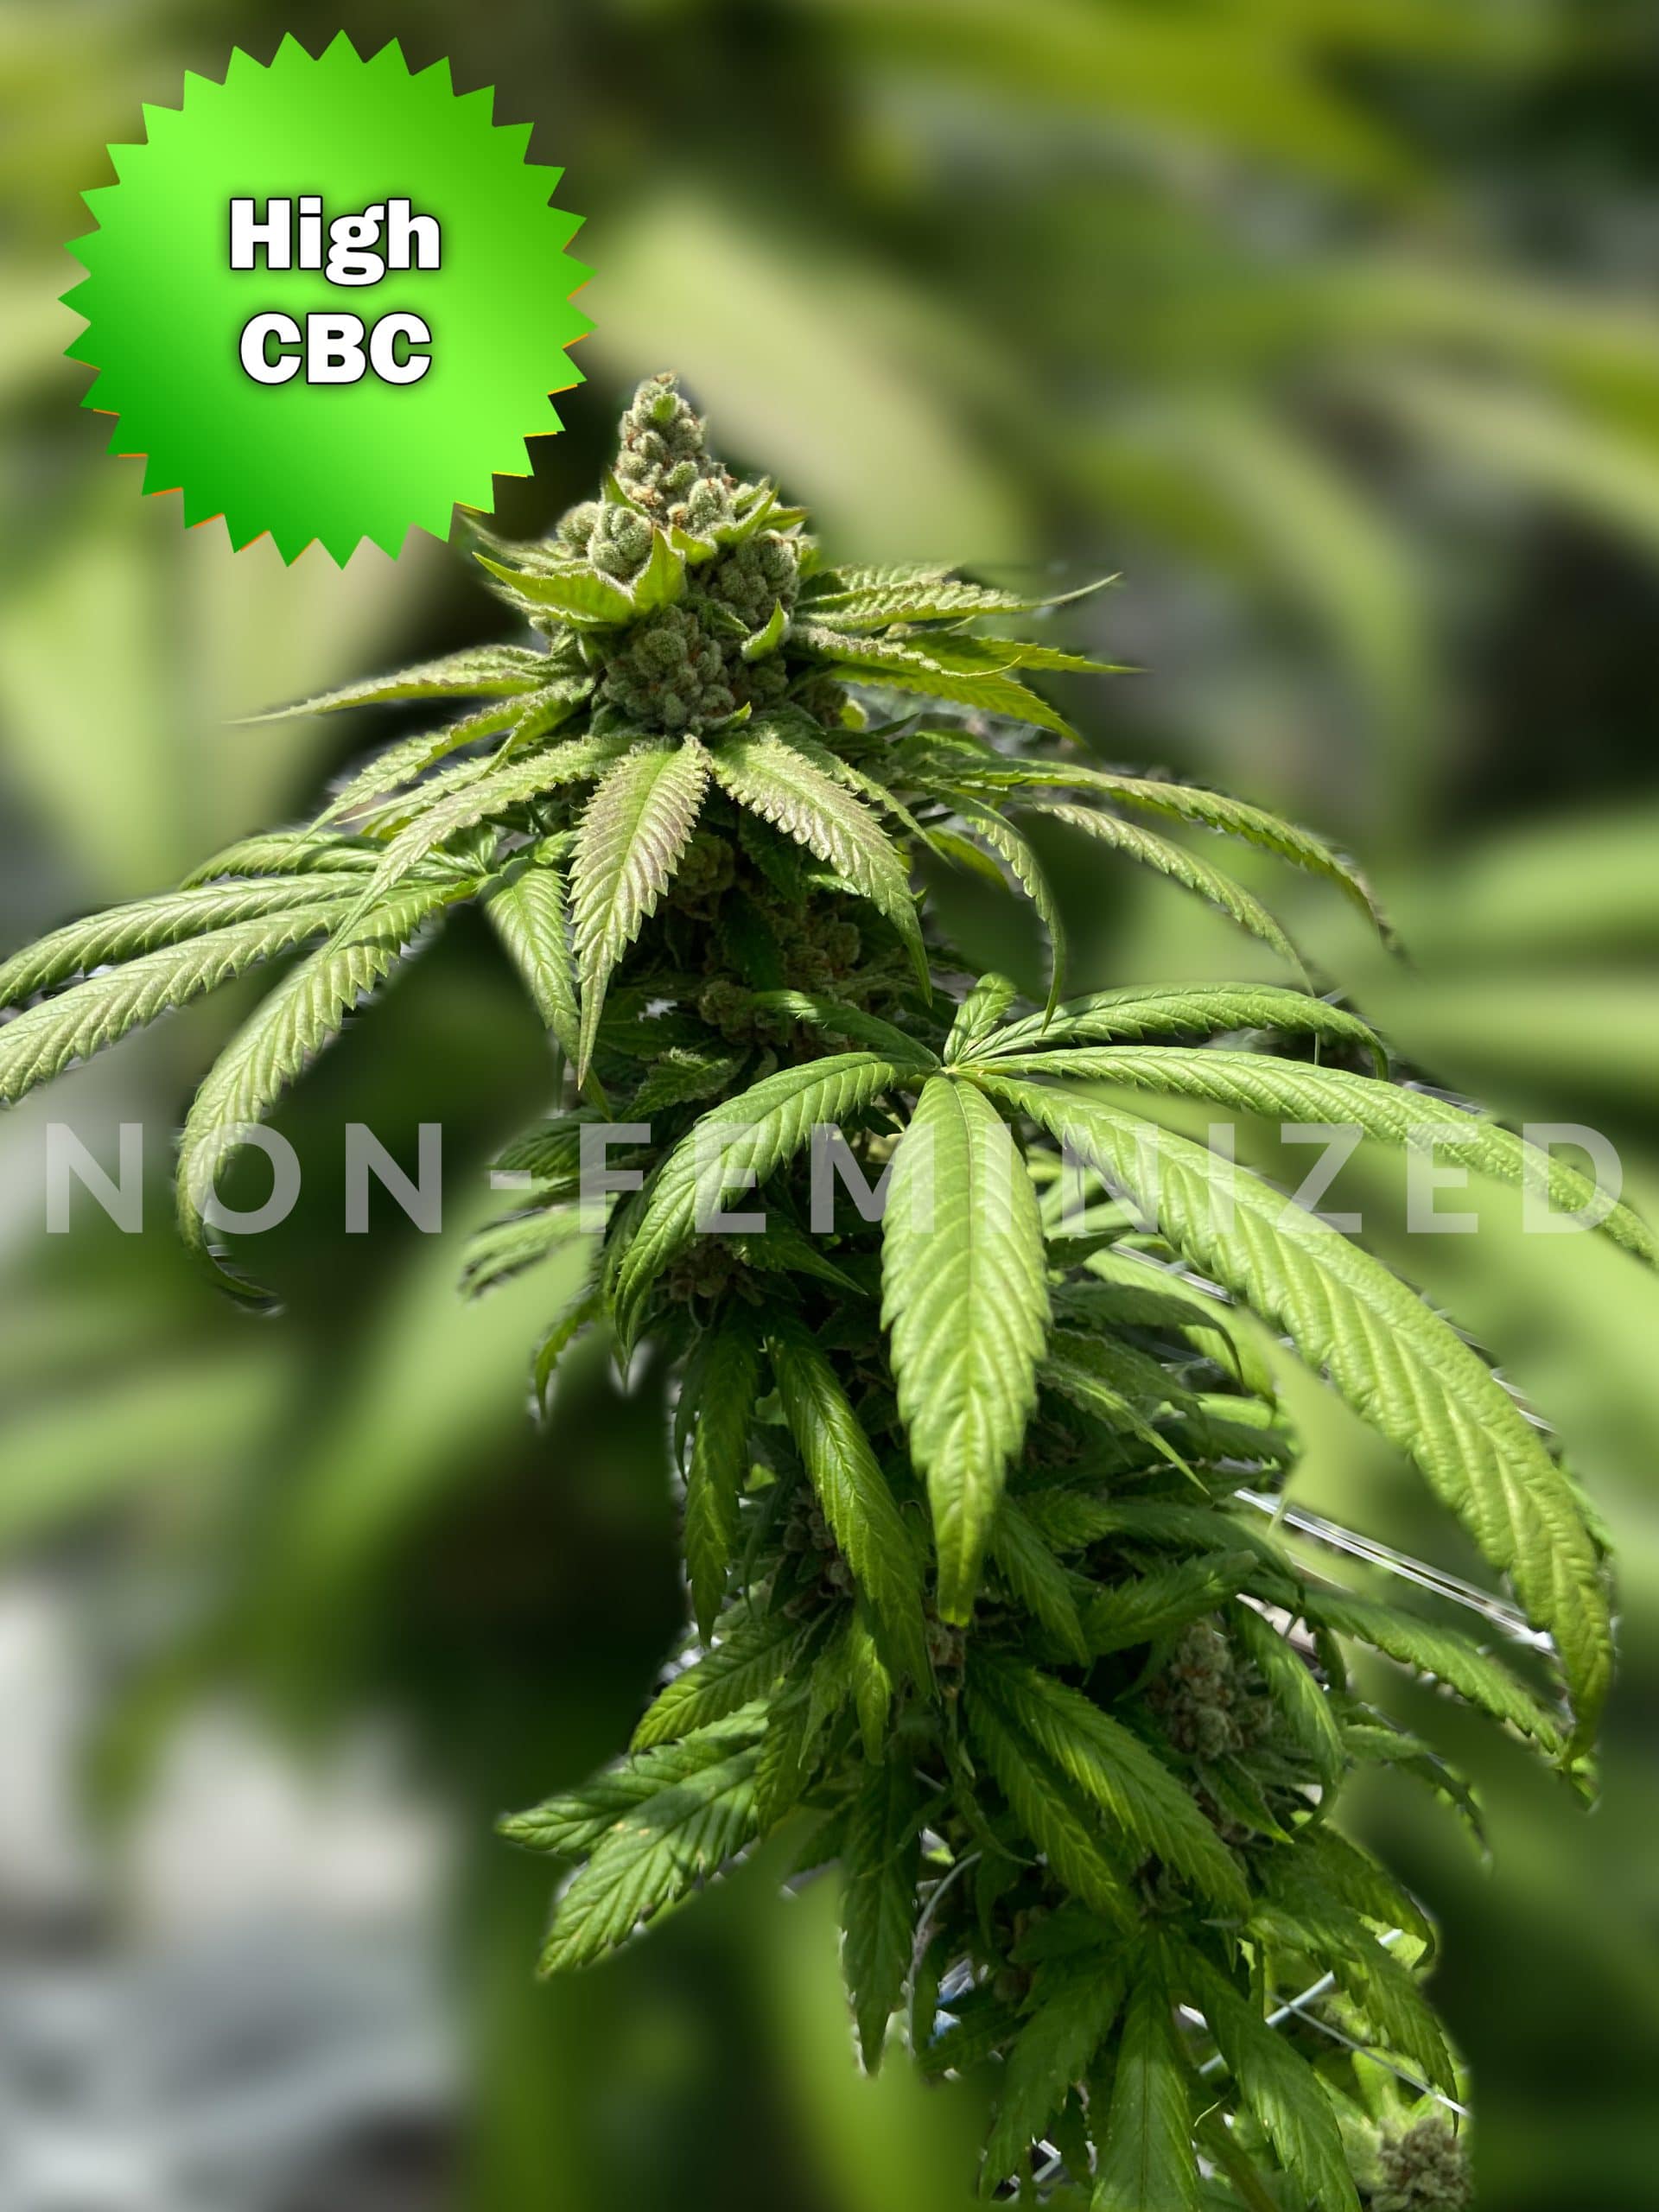 Best Bud Seeds Online Seed Bank CBD Ba Ox non feminized scaled 2 2 | Best Bud Seeds